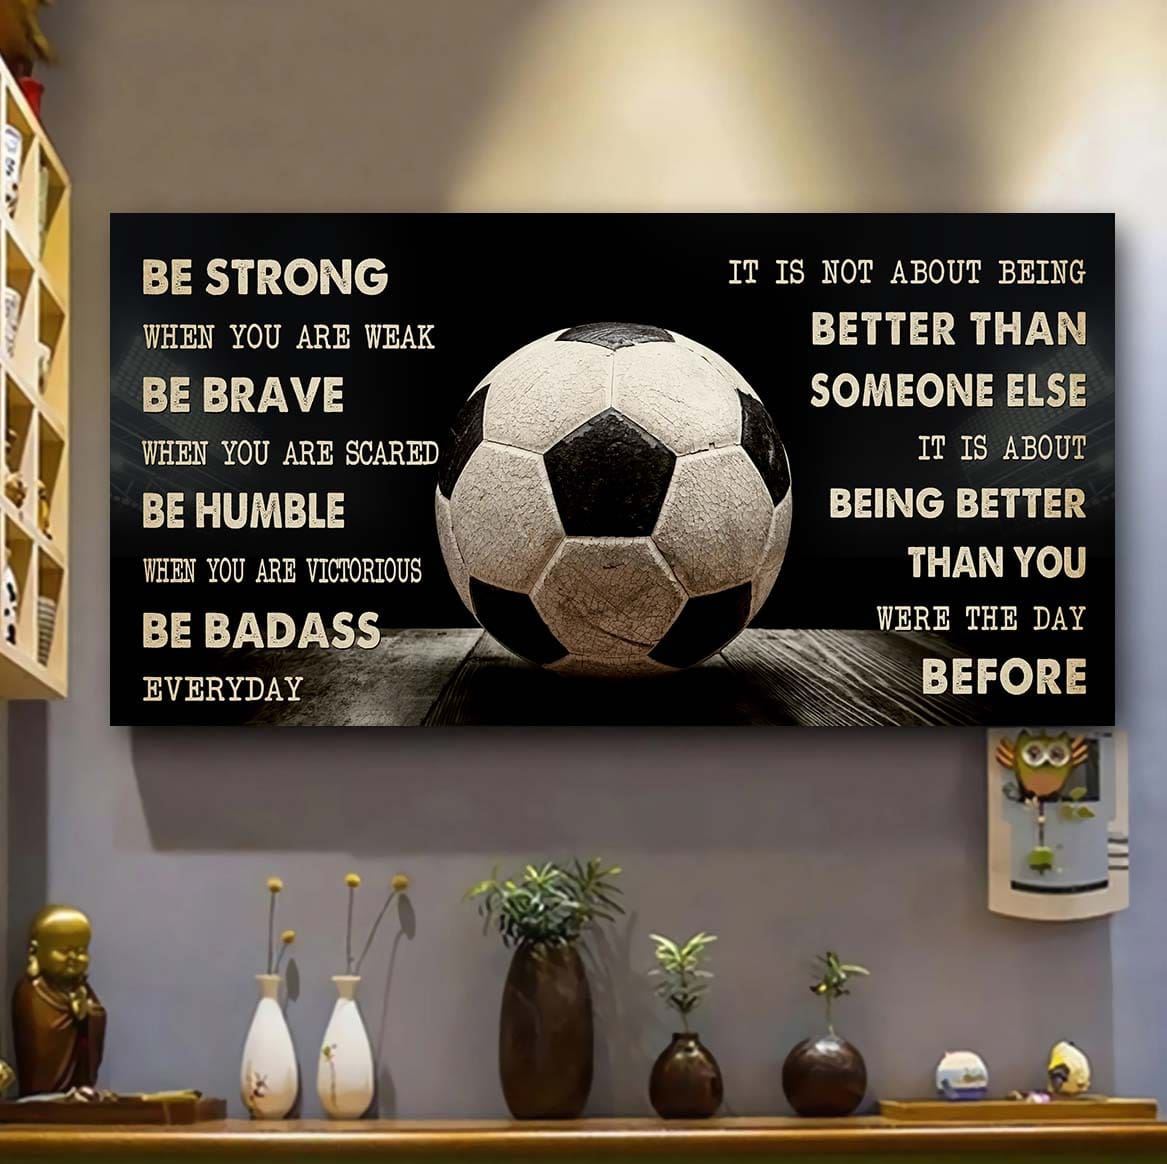 Lacrosse Poster It Is Not About Being Better Than Someone Else - Be Strong When You Are Weak